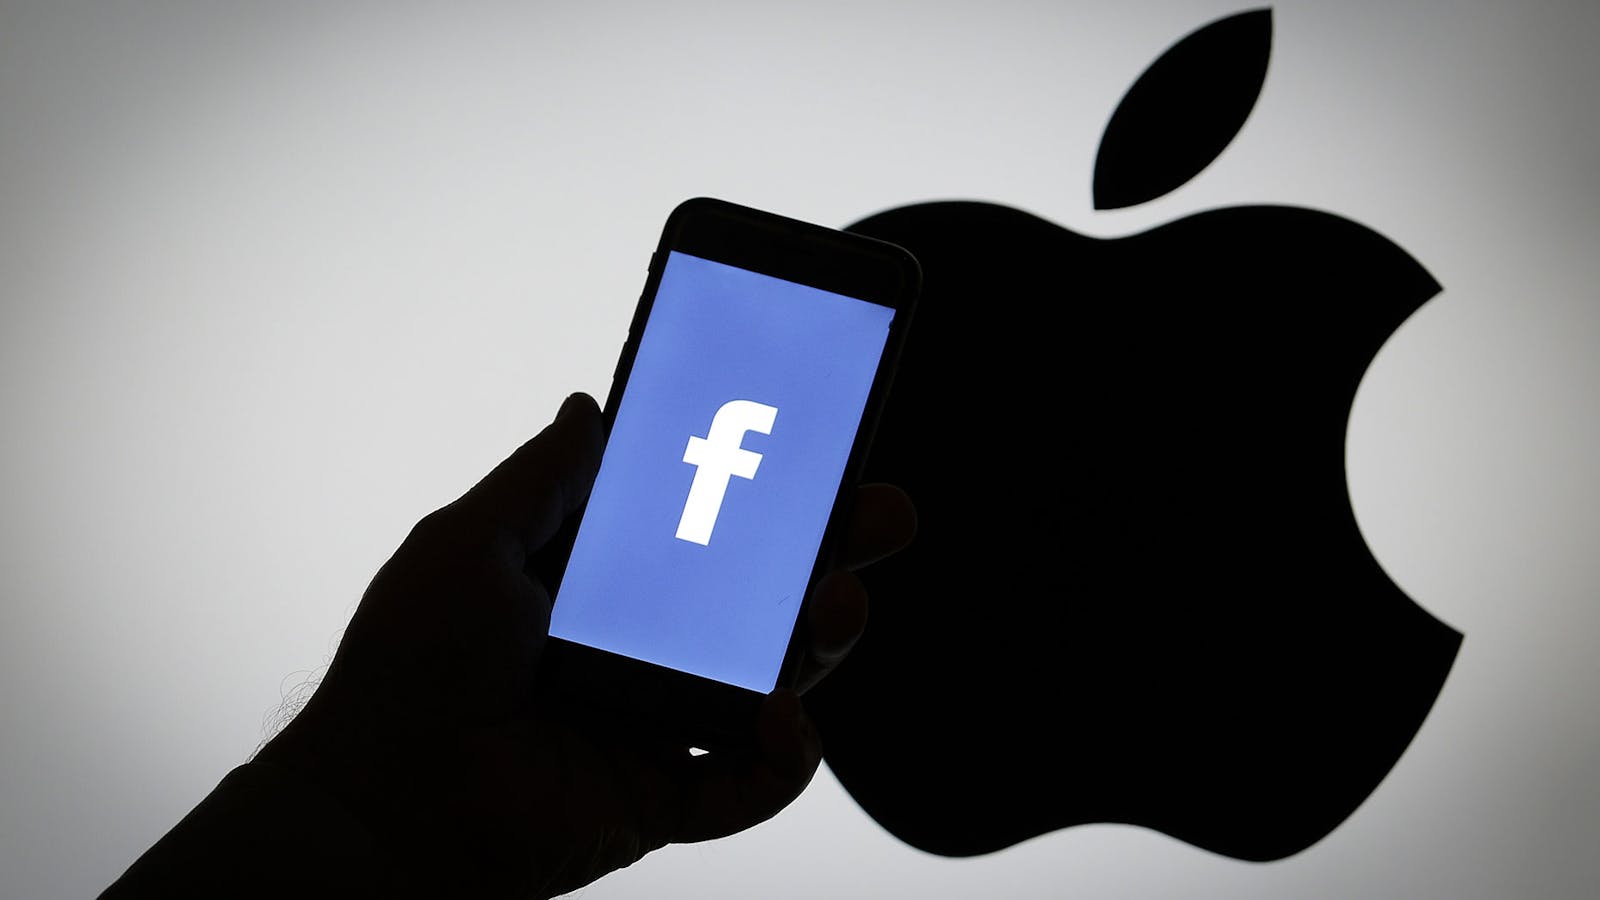 A move by Apple to restrict ad tracking on iPhones and iPads could reduce the effectiveness of Facebook's ad tracking system. Photo: AP